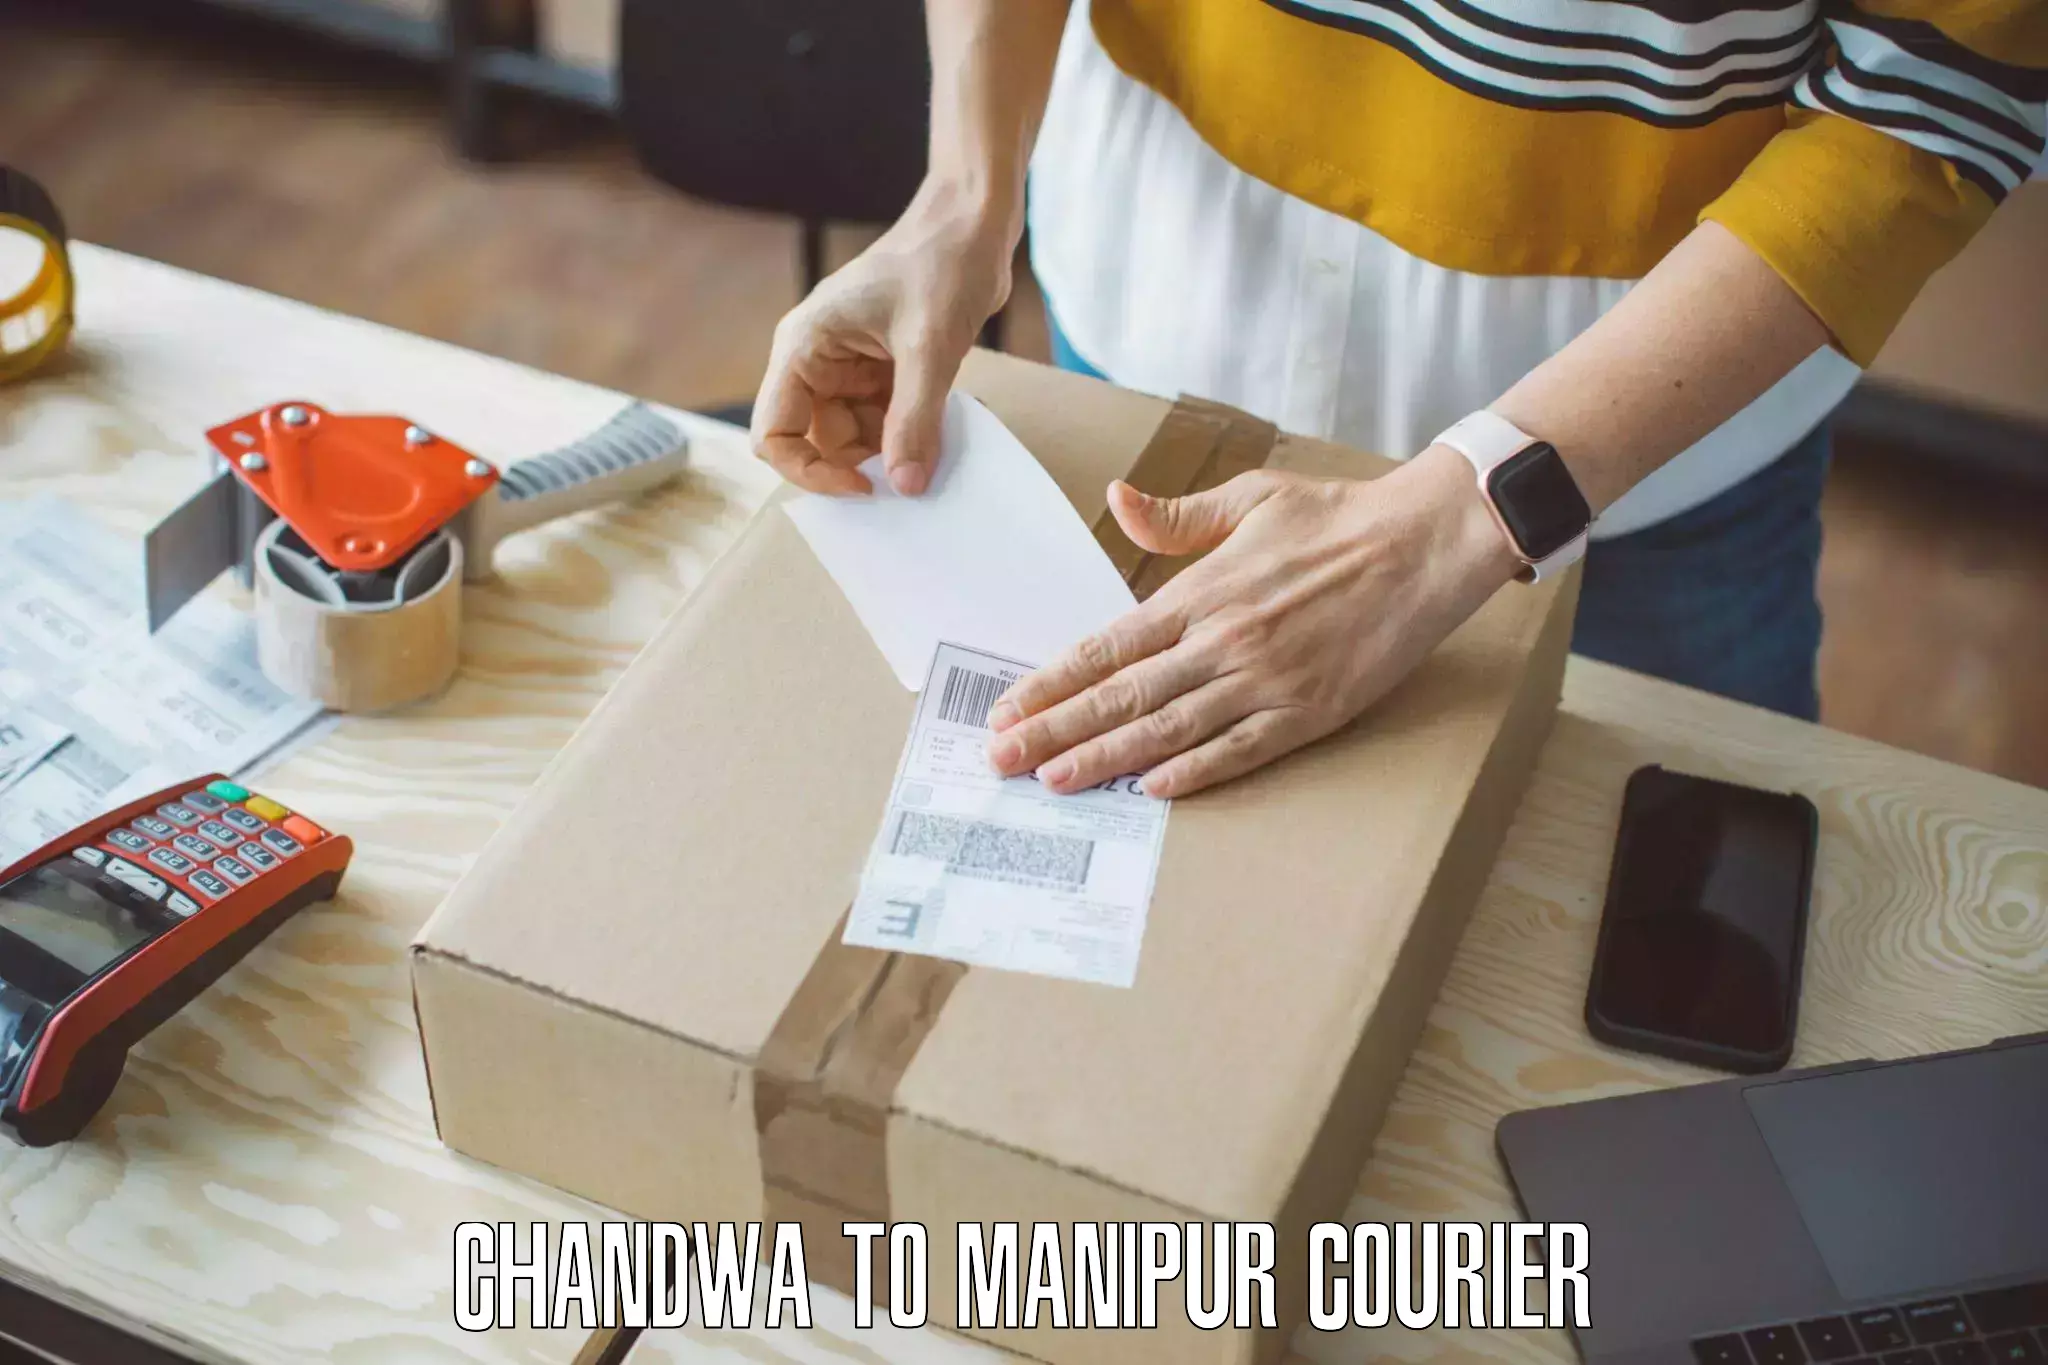 Furniture transport solutions Chandwa to Manipur